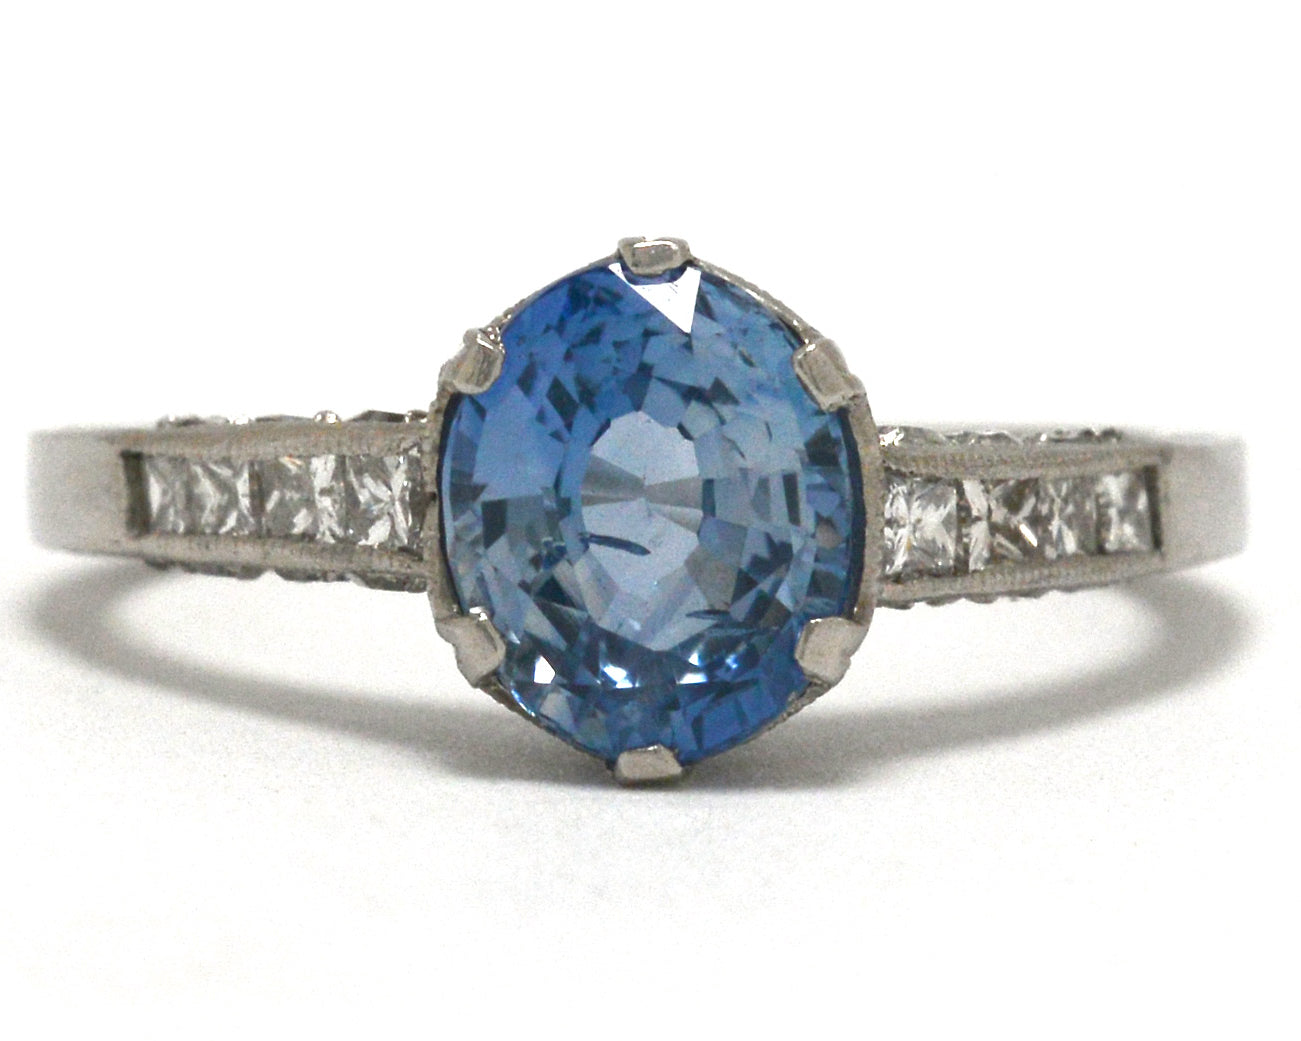 Art Deco inspired ceylon sapphire solitaire engagement ring with diamonds.